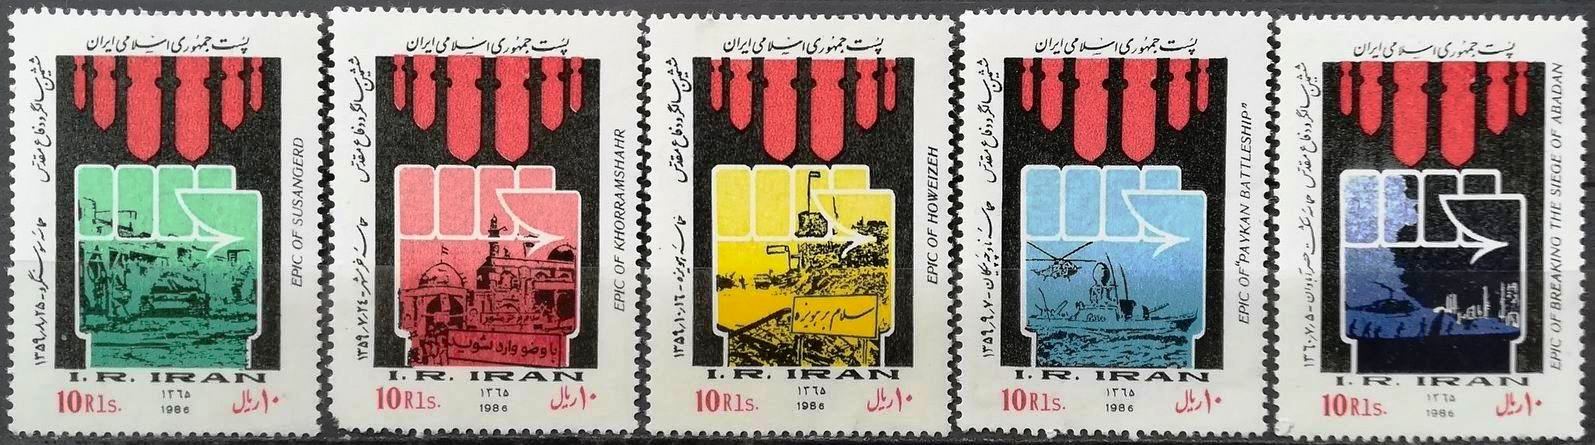 Iran 1986 Fdc & Stamps Beginning Of the Iraq War - Click Image to Close